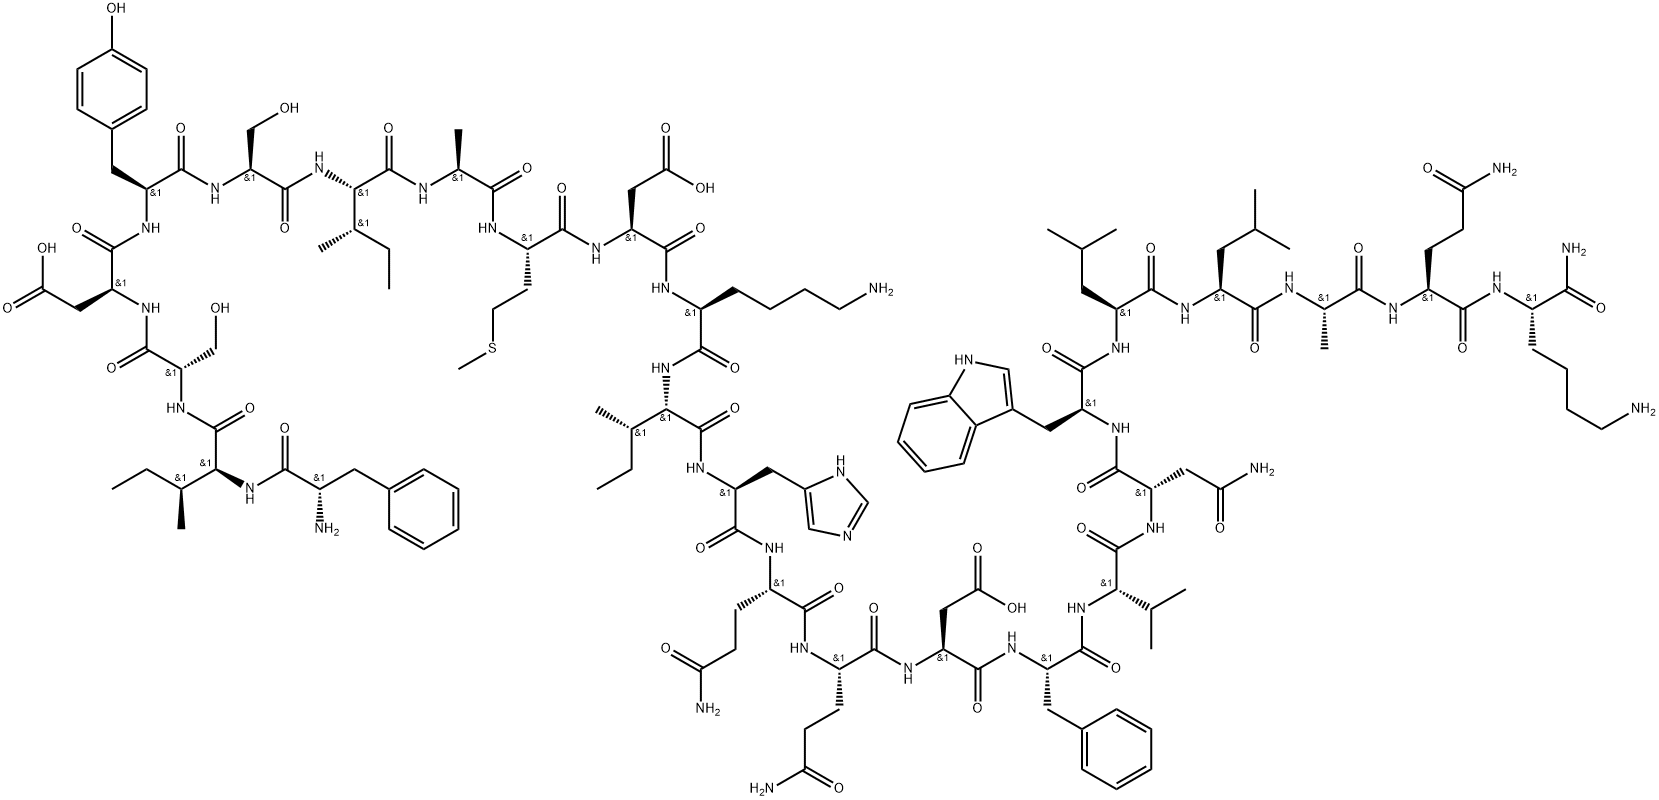 GASTRIC INHIBITORY POLYPEPTIDE (6-30) AMIDE (HUMAN), 1139691-72-7, 结构式